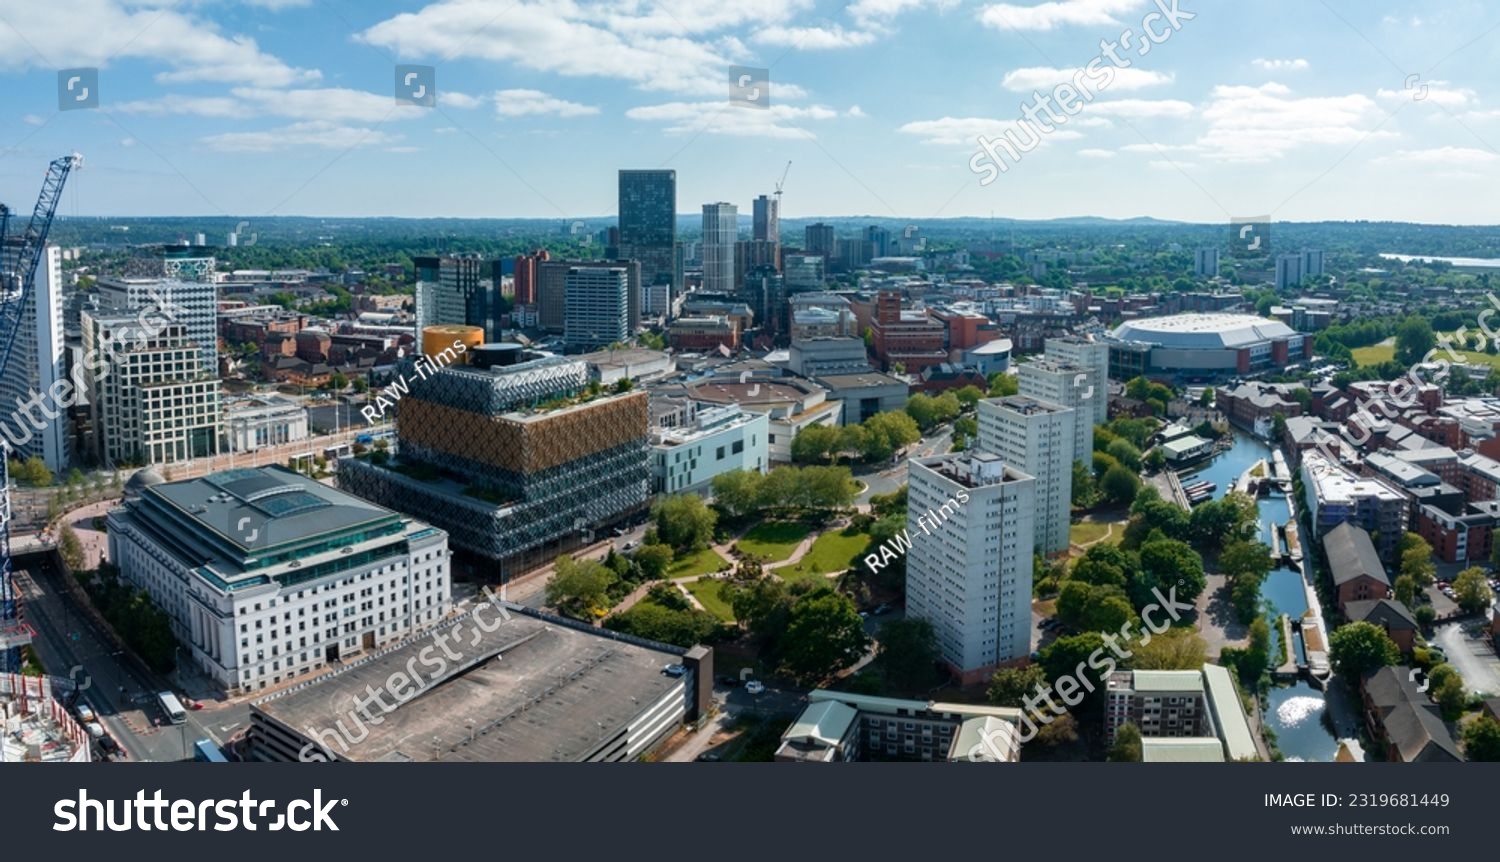 Aerial view of the library of Birmingham, Baskerville House, Centenary Square, Birmingham, West Midlands, England, United Kingdom. #2319681449